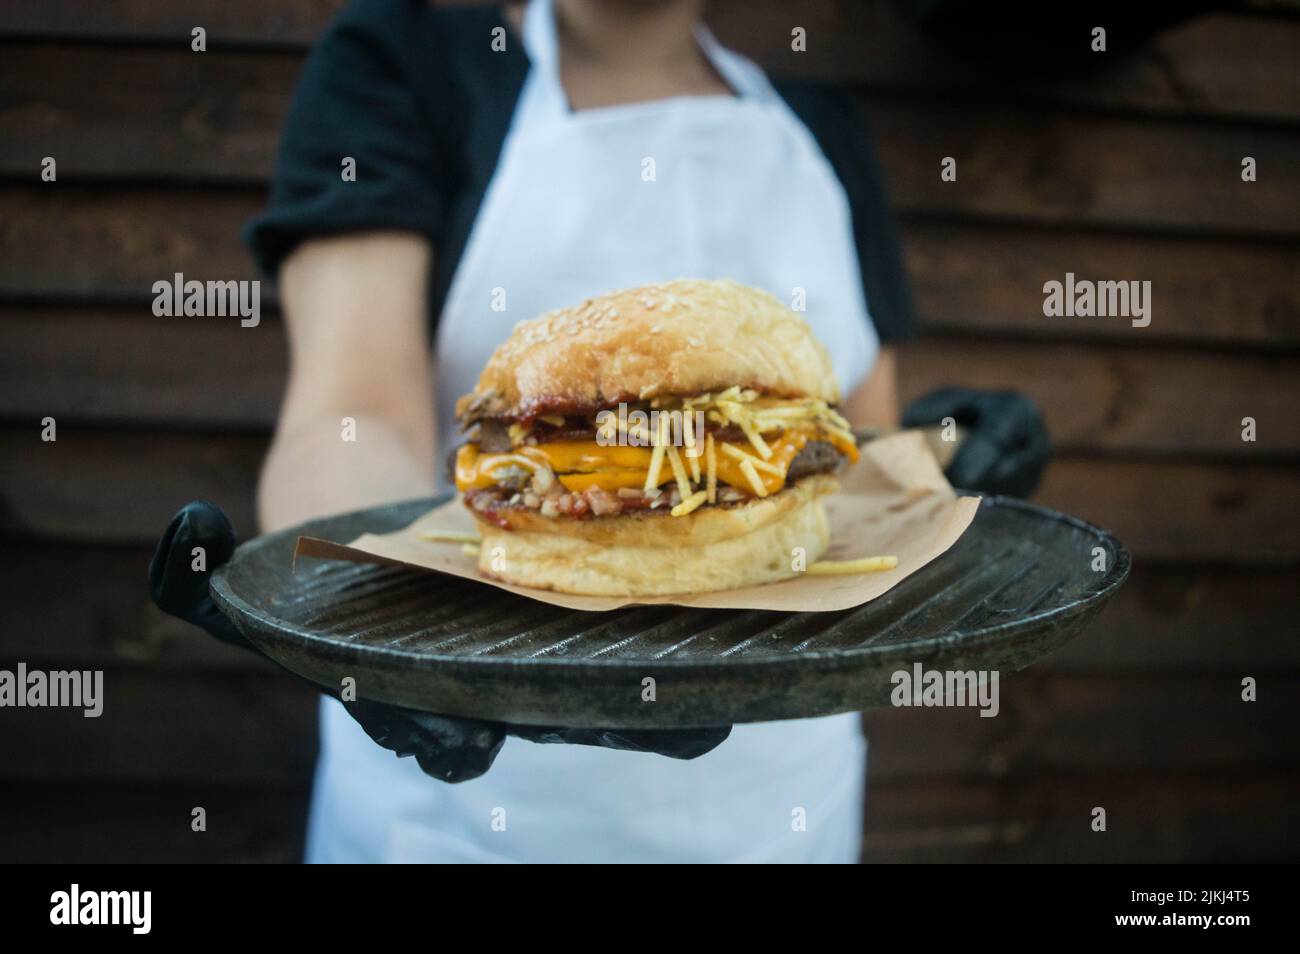 A close-up shot of a chef holding a burger on a black ceramic plate. Stock Photo